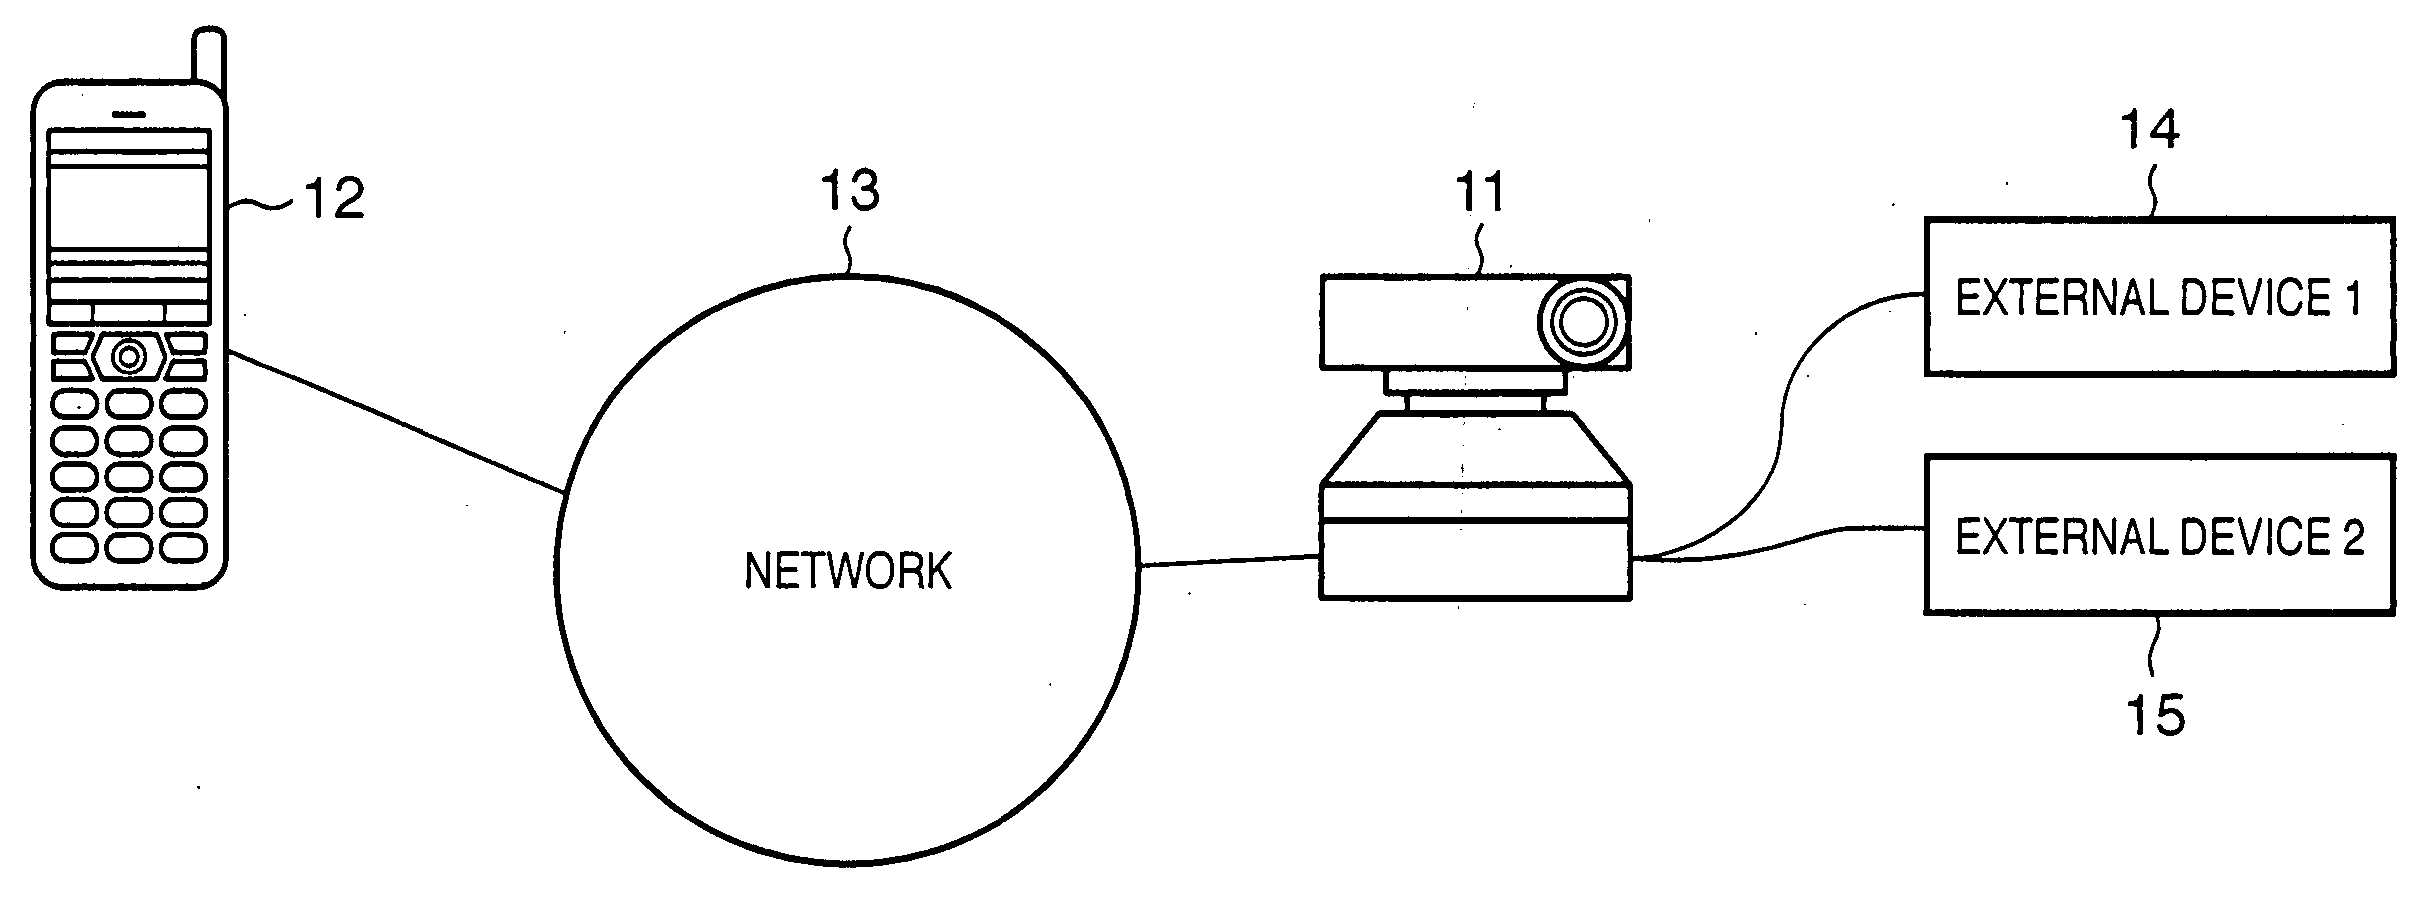 Operation at mobile terminal when communicating with remote camera